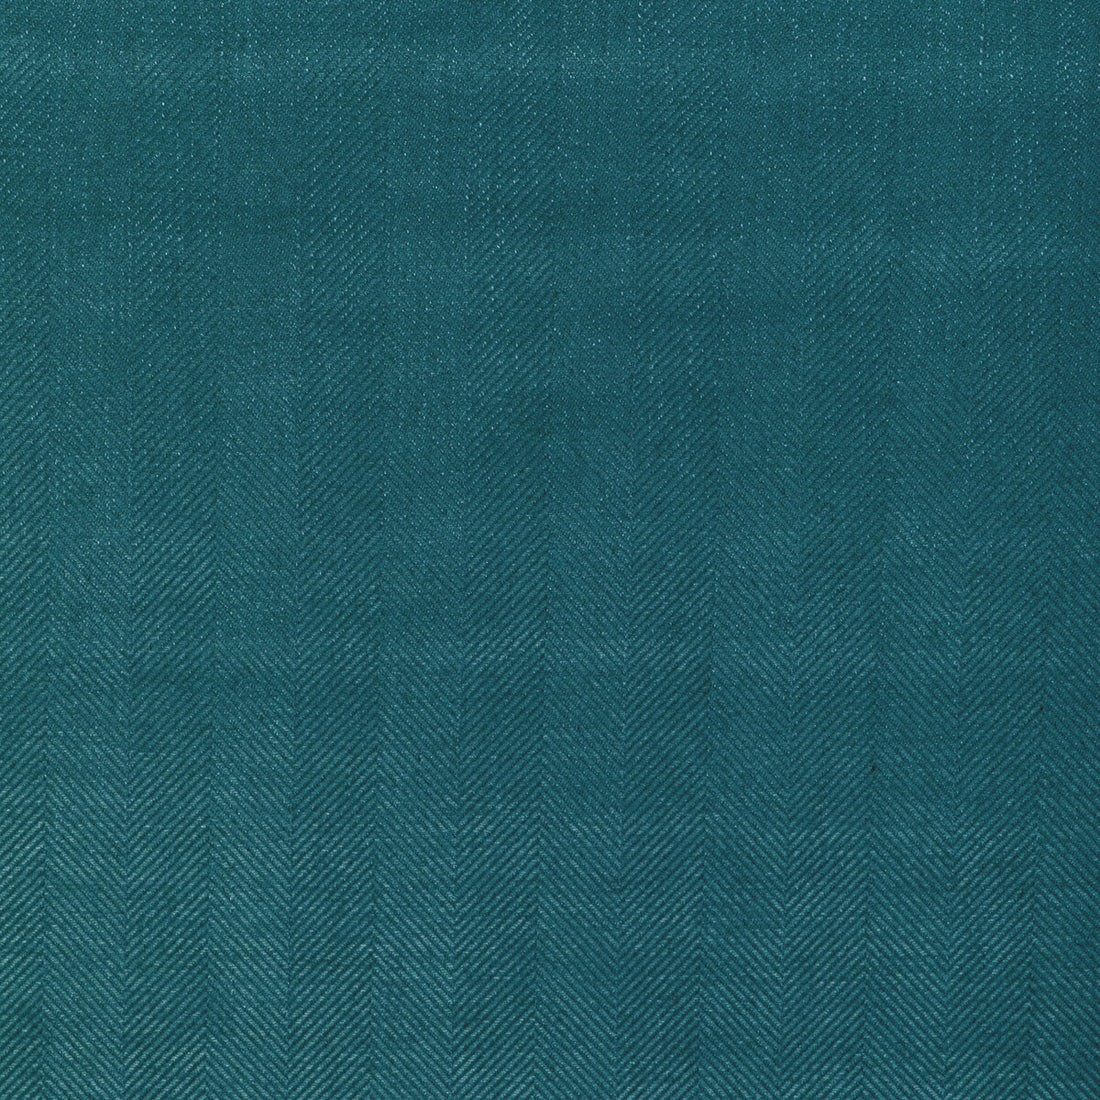 Rhone Weave fabric in teal color - pattern 8023133.313.0 - by Brunschwig &amp; Fils in the Arles Weaves collection